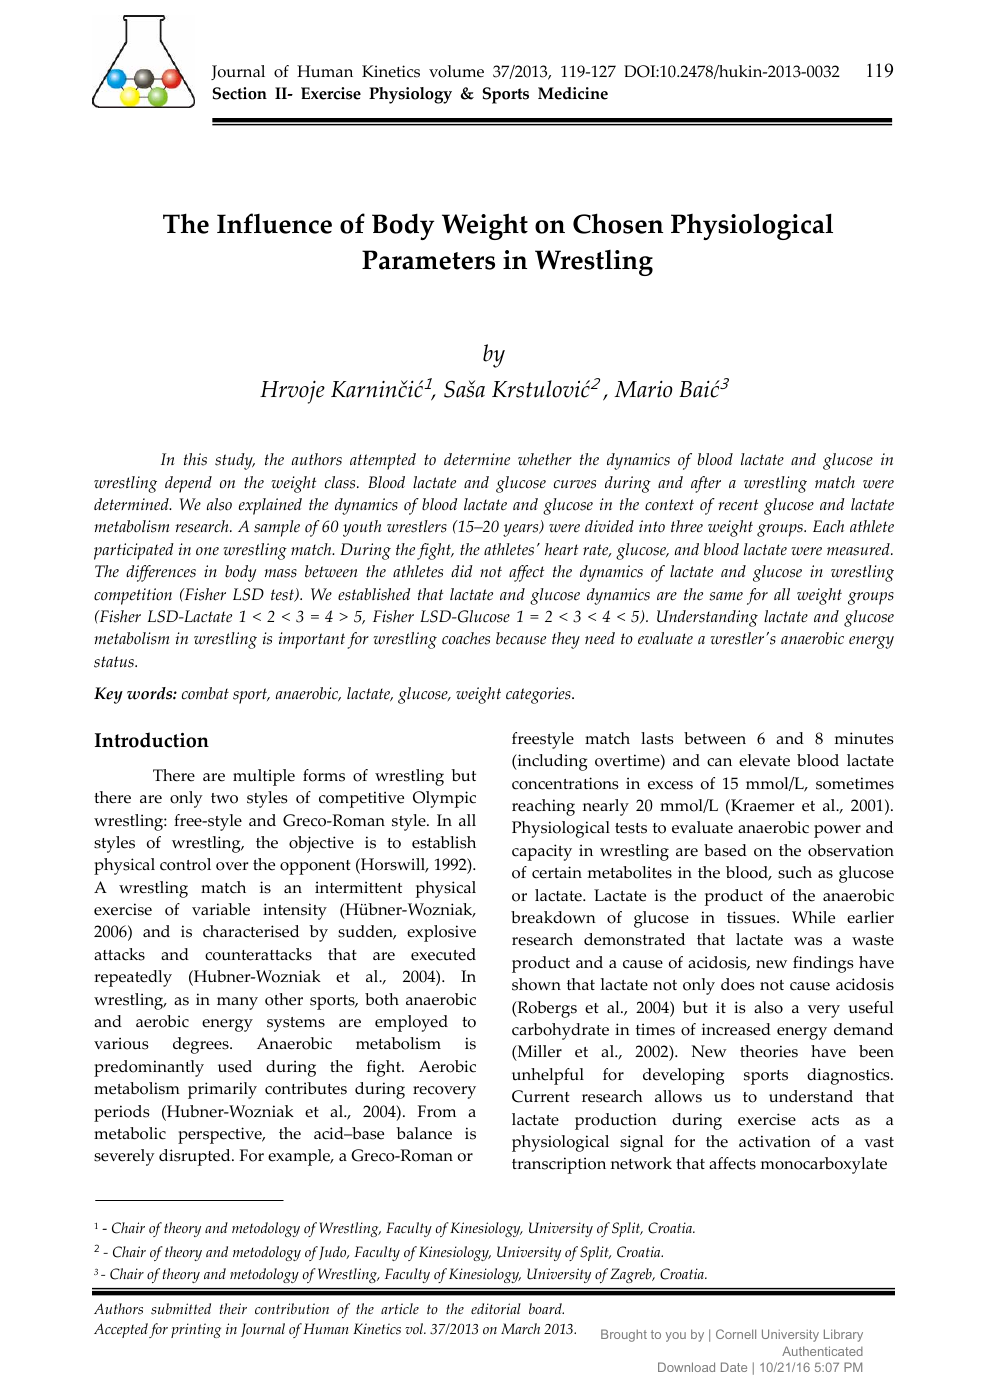 The Influence of Body Weight on Chosen Physiological Parameters in Wrestling 